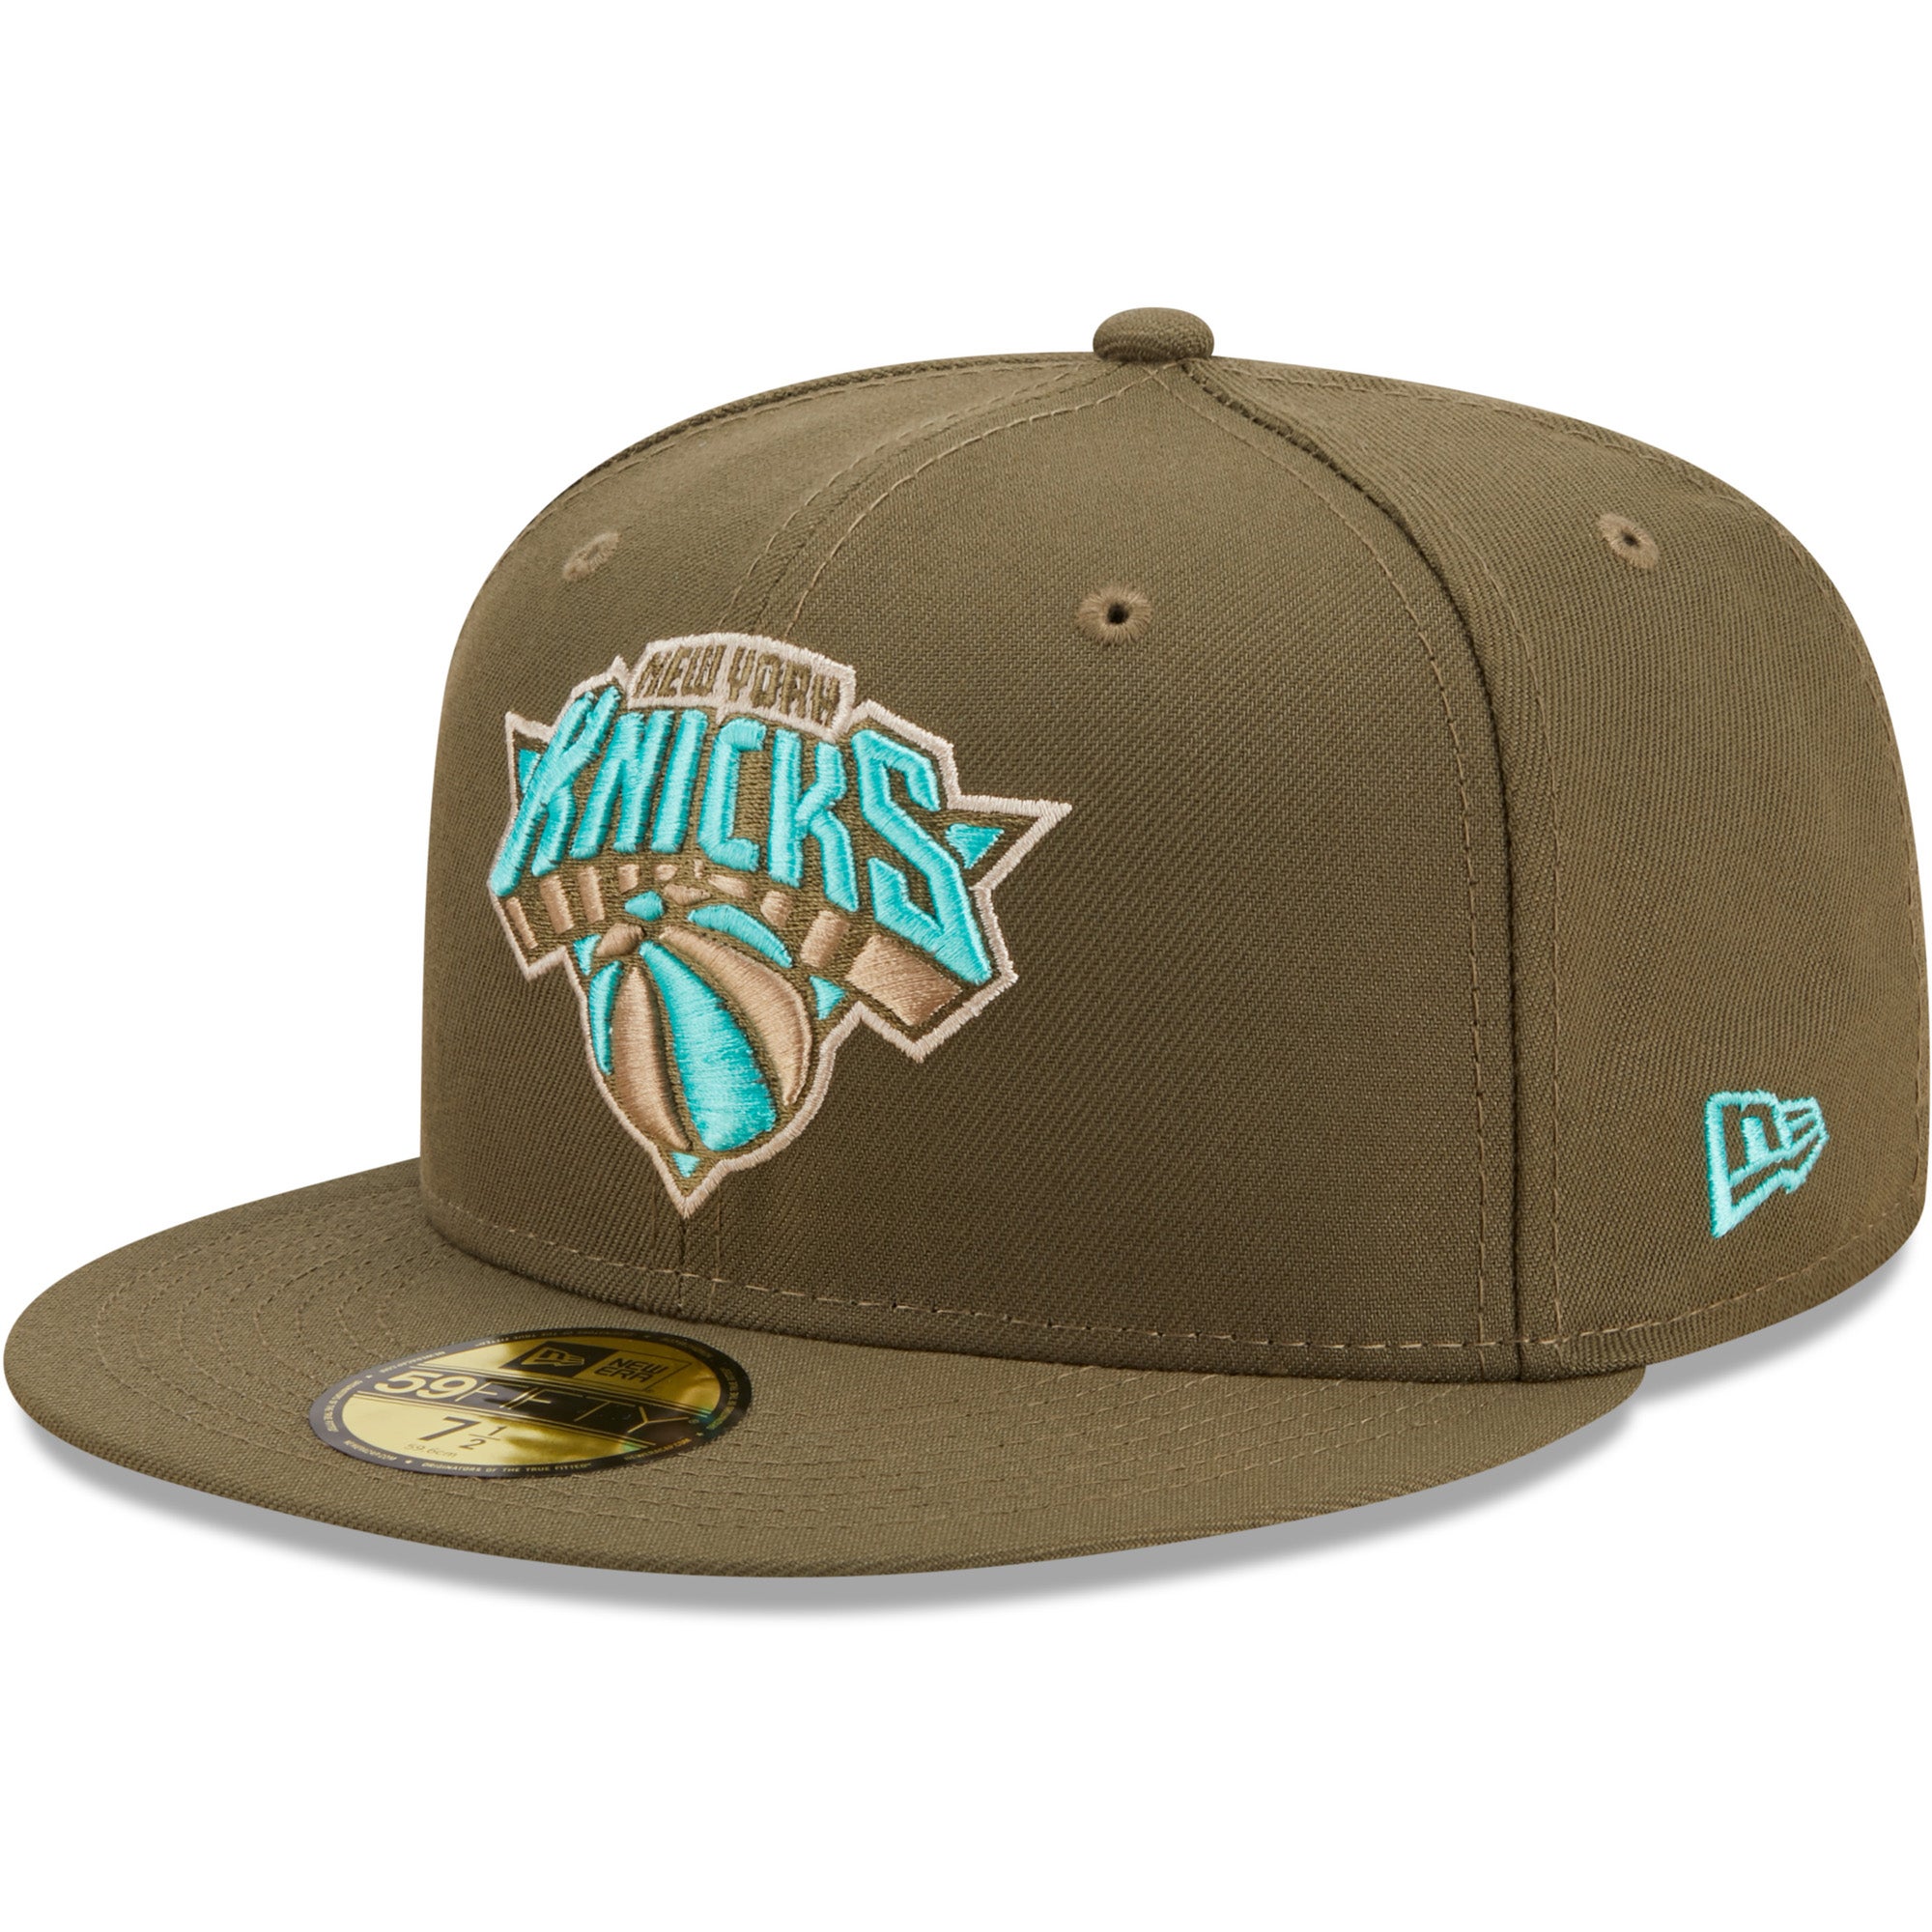 New Era Knicks Army 59FIFTY Fitted Hat